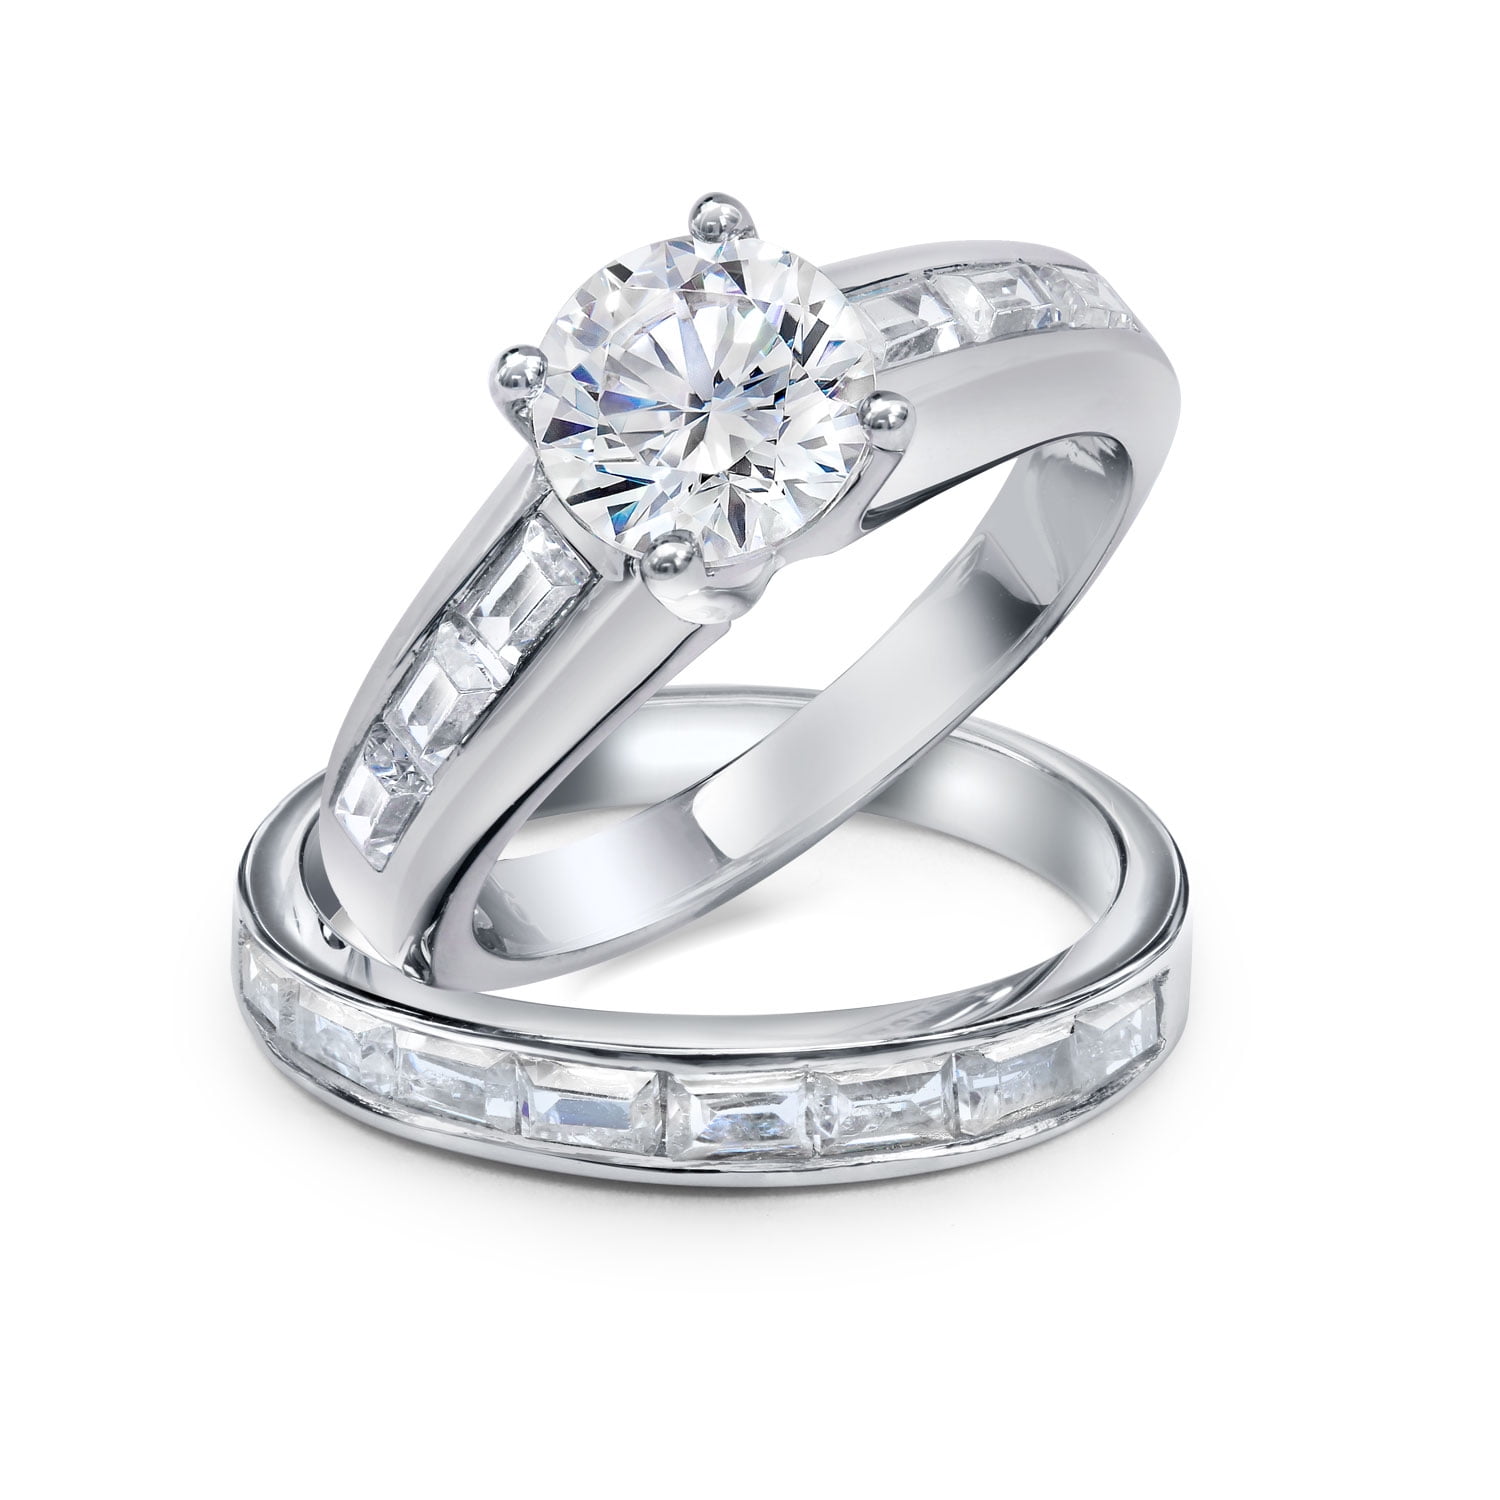 Pretty AAA Cr Diamond  Ring set in Rhodium over Sterling Silver